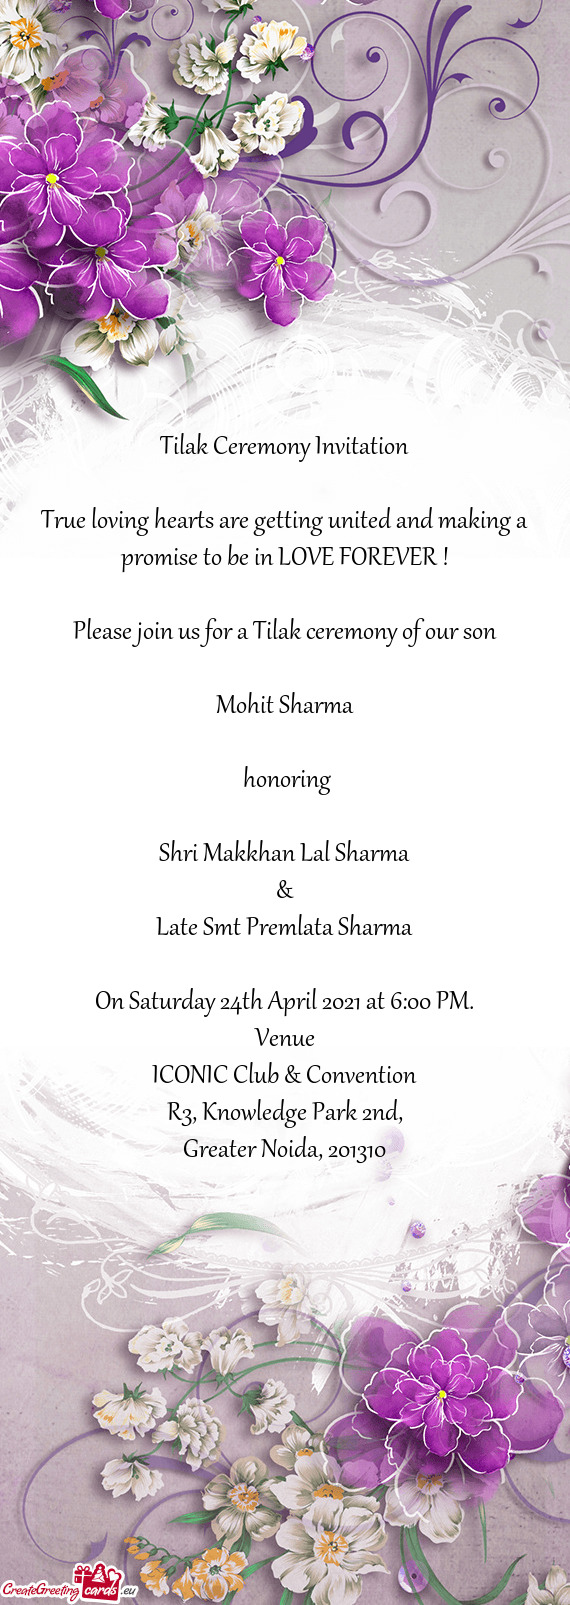 Please join us for a Tilak ceremony of our son